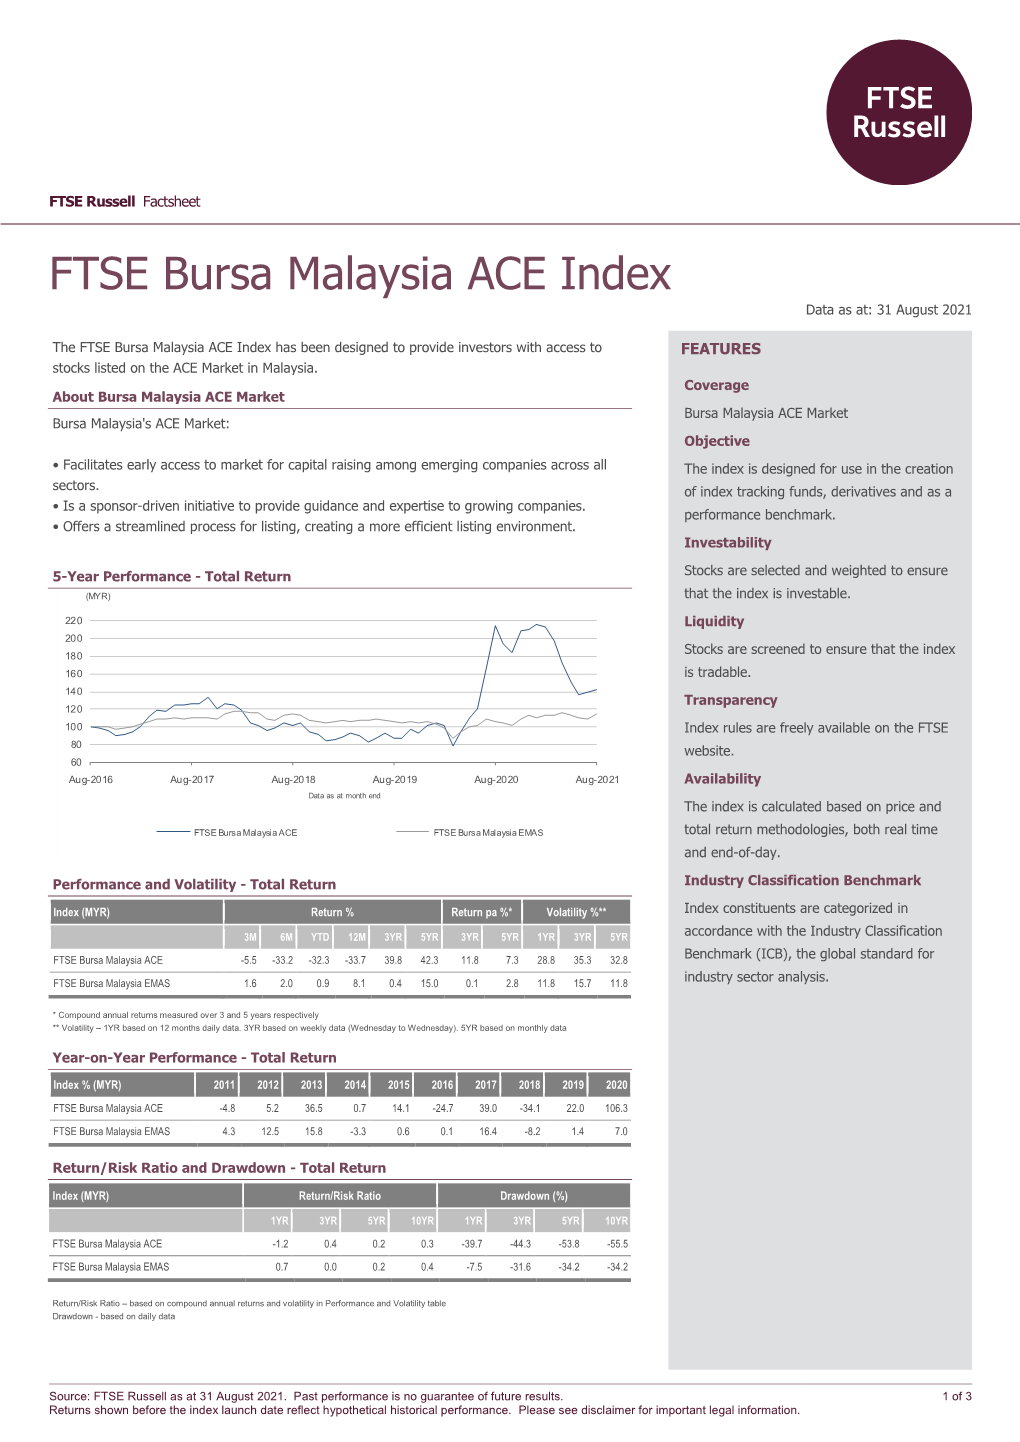 FTSE Bursa Malaysia ACE Index Data As At: 31 August 2021 Bmktitle1 the FTSE Bursa Malaysia ACE Index Has Been Designed to Provide Investors with Access to FEATURES